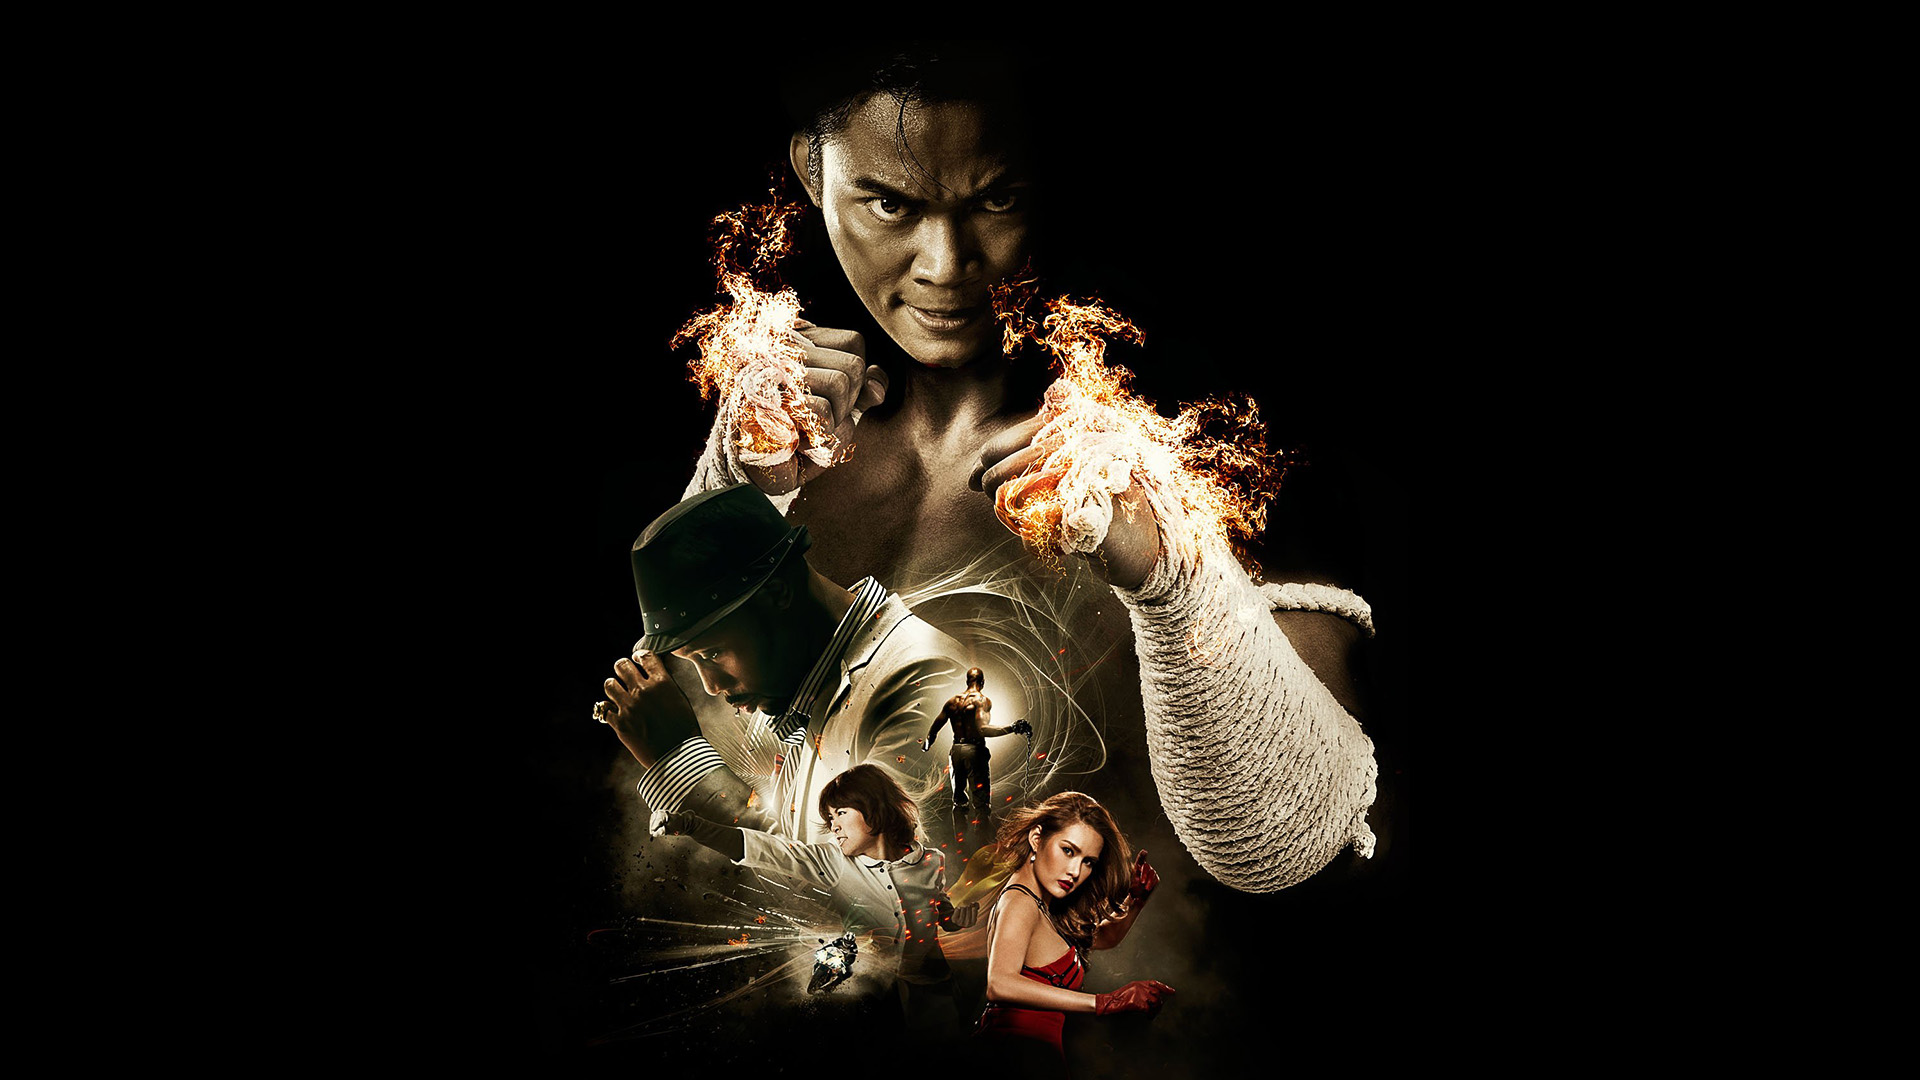 Movie The Protector 2 HD Wallpaper